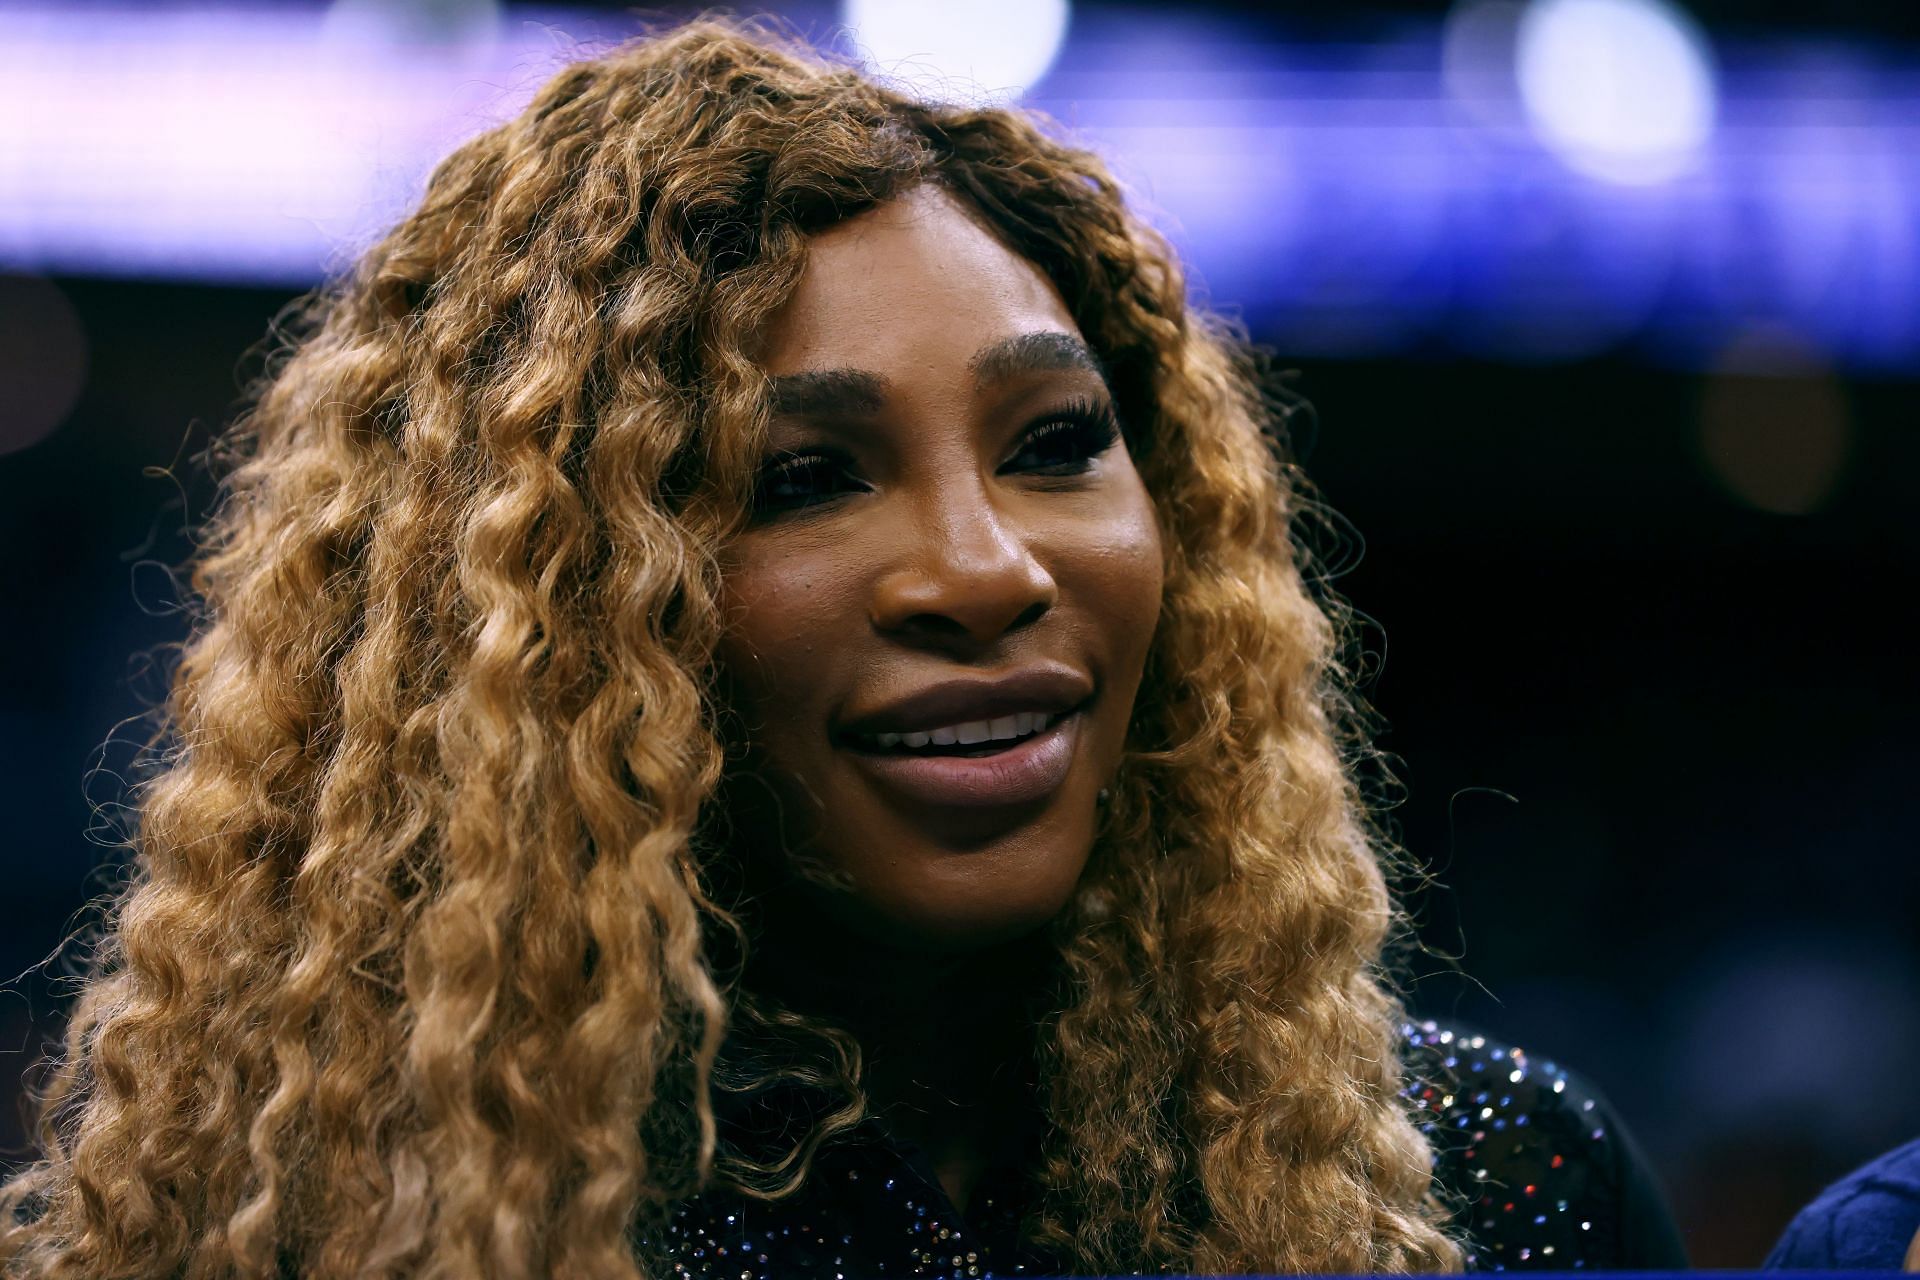 Serena Williams is yet to make a return to action